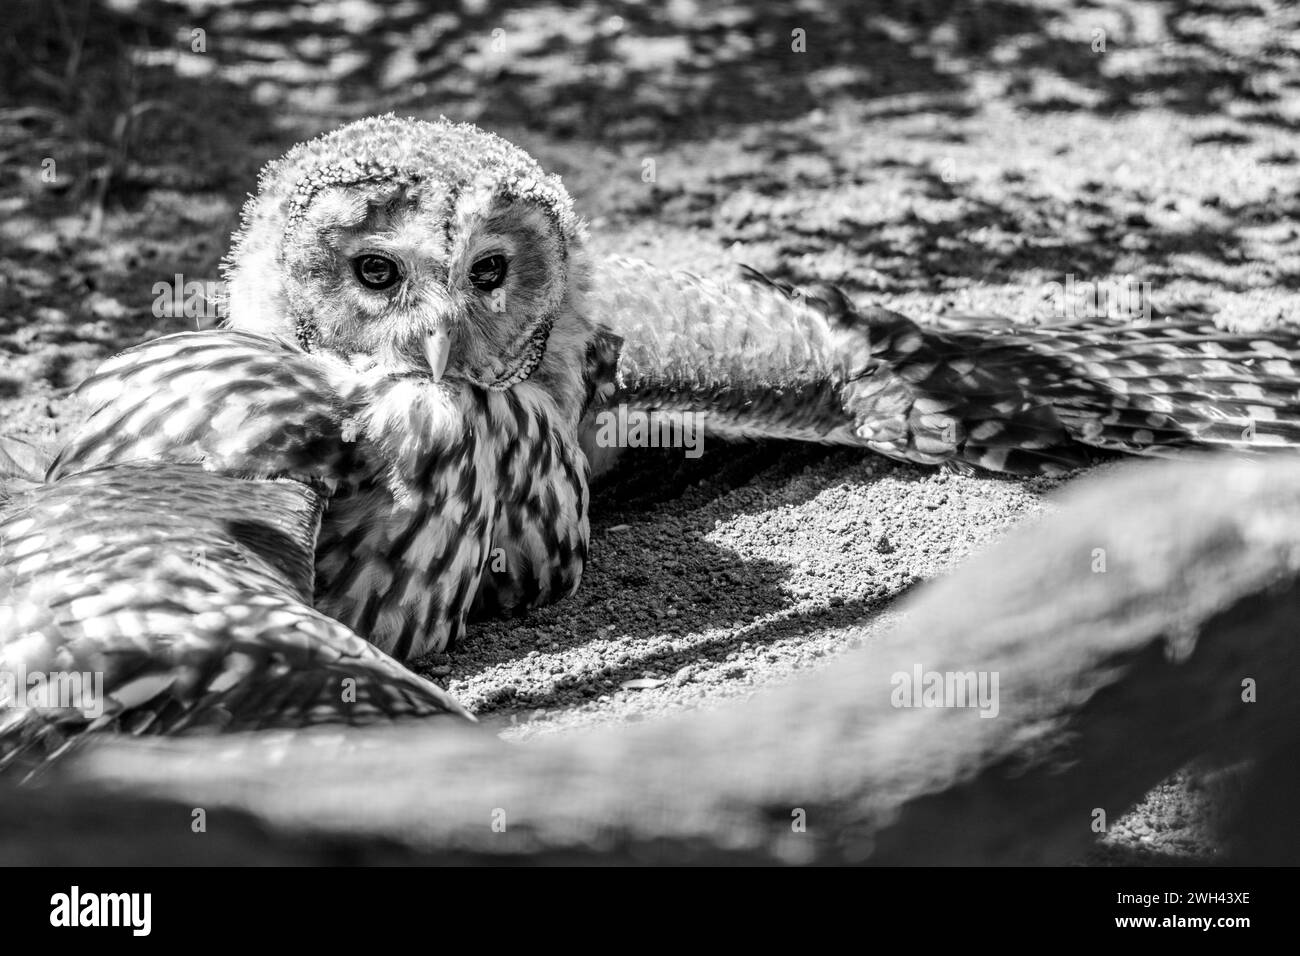 Ural owl, Strix uralensis, large nocturnal owl sitting on the ground. Black and white photography. Stock Photo